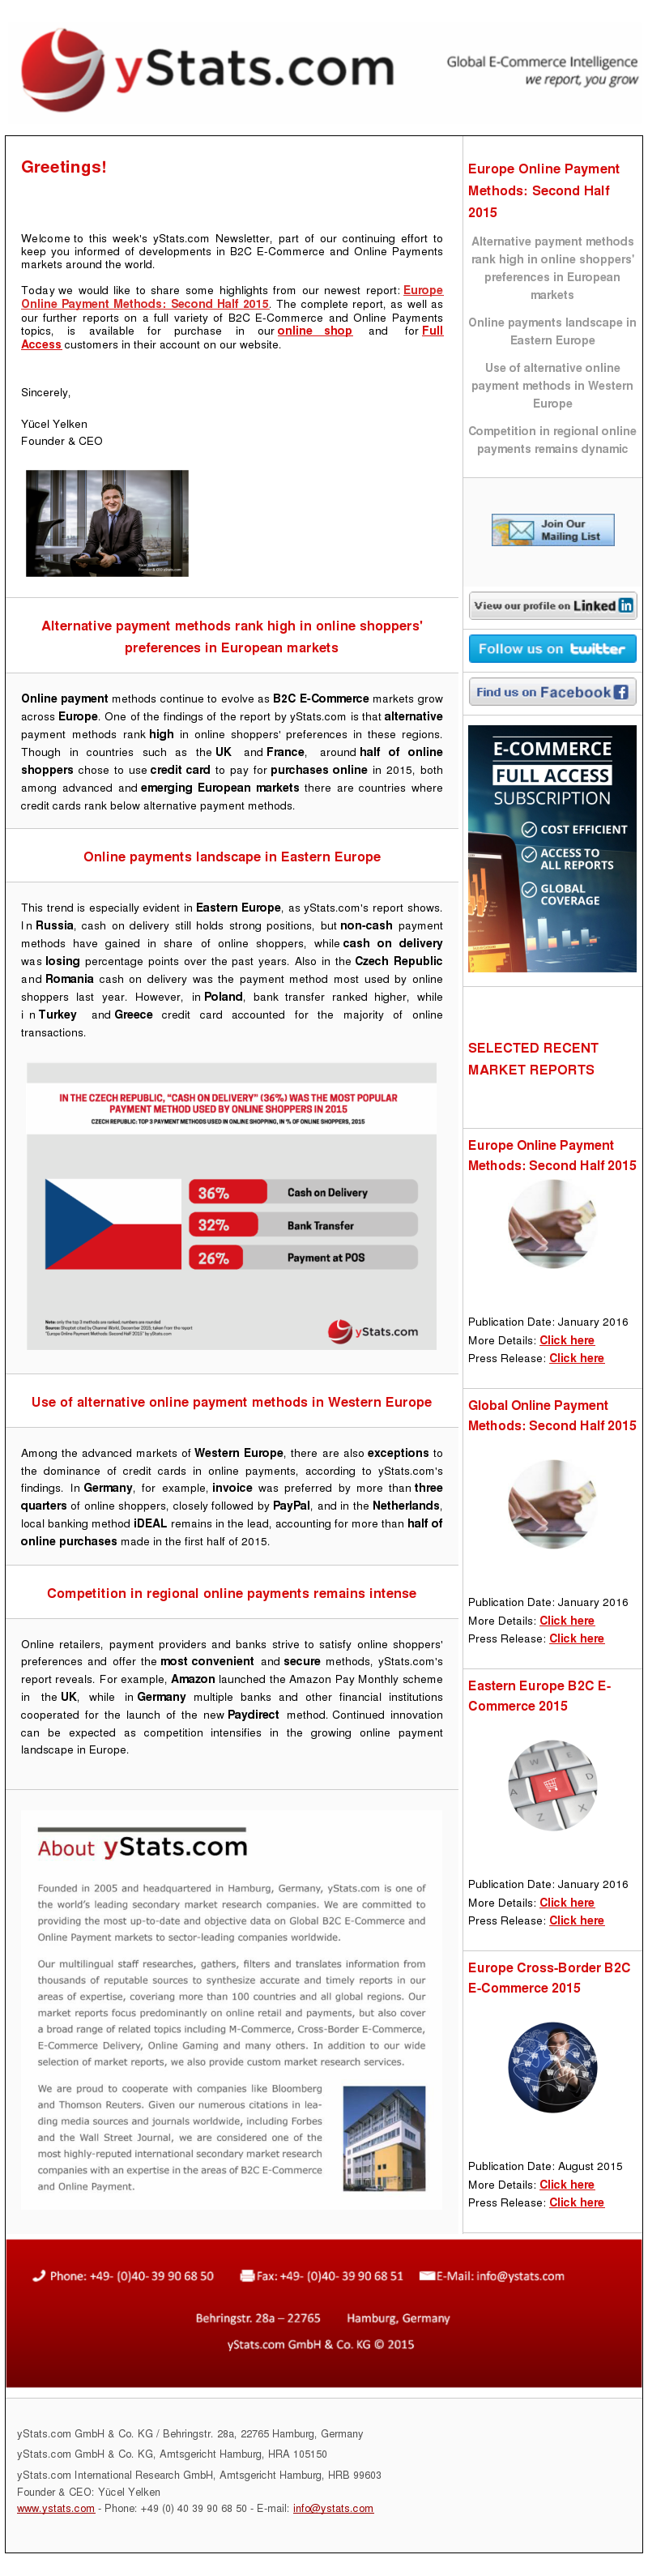 yStats.com Newsletter , 2016 , advanced markets , emerging European markets , online shoppers , Online payment methods , UK , Germany , Netherlands , local banking method iDEAL , invoice , Turkey , PayPal , Greece , Russia , Czech Republic , Romania , Amazon Pay , Online retailers , payment providers , non-cash payment methods , cash on delivery , B2C E-Commerce markets growth , Europe online payment landscape  Online payment methods continue to evolve as B2C E-Commerce markets grow across Europe. One of the findings of the report by yStats.com is that alternative payment methods rank high in online shoppers’ preferences in these regions. Though in countries such as the UK and France, around half of online shoppers chose to use credit card to pay for purchases online in 2015, both among advanced and emerging European markets there are countries where credit cards rank below alternative payment methods.

This trend is especially evident in Eastern Europe, as yStats.com’s report shows. In Russia, cash on delivery still holds strong positions, but non-cash payment methods have gained in share of online shoppers, while cash on delivery was losing percentage points over the past years. Also in the Czech Republic and Romania cash on delivery was the payment method most used by online shoppers last year. However, in Poland, bank transfer ranked higher, while in Turkey and Greece credit card accounted for the majority of online transactions.

Among the advanced markets of Western Europe, there are also exceptions to the dominance of credit cards in online payments, according to yStats.com’s findings. In Germany, for example, invoice was preferred by more than three quarters of online shoppers, closely followed by PayPal, and in the Netherlands, local banking method iDEAL remains in the lead, accounting for more than half of online purchases made in the first half of 2015.

Online retailers, payment providers and banks strive to satisfy online shoppers’ preferences and offer the most convenient and secure methods, yStats.com’s report reveals. For example, Amazon launched the Amazon Pay Monthly scheme in the UK, while in Germany multiple banks and other financial institutions cooperated for the launch of the new Paydirect method. More launches are expected to come as competition intensifies in the growing online payment landscape in Europe.